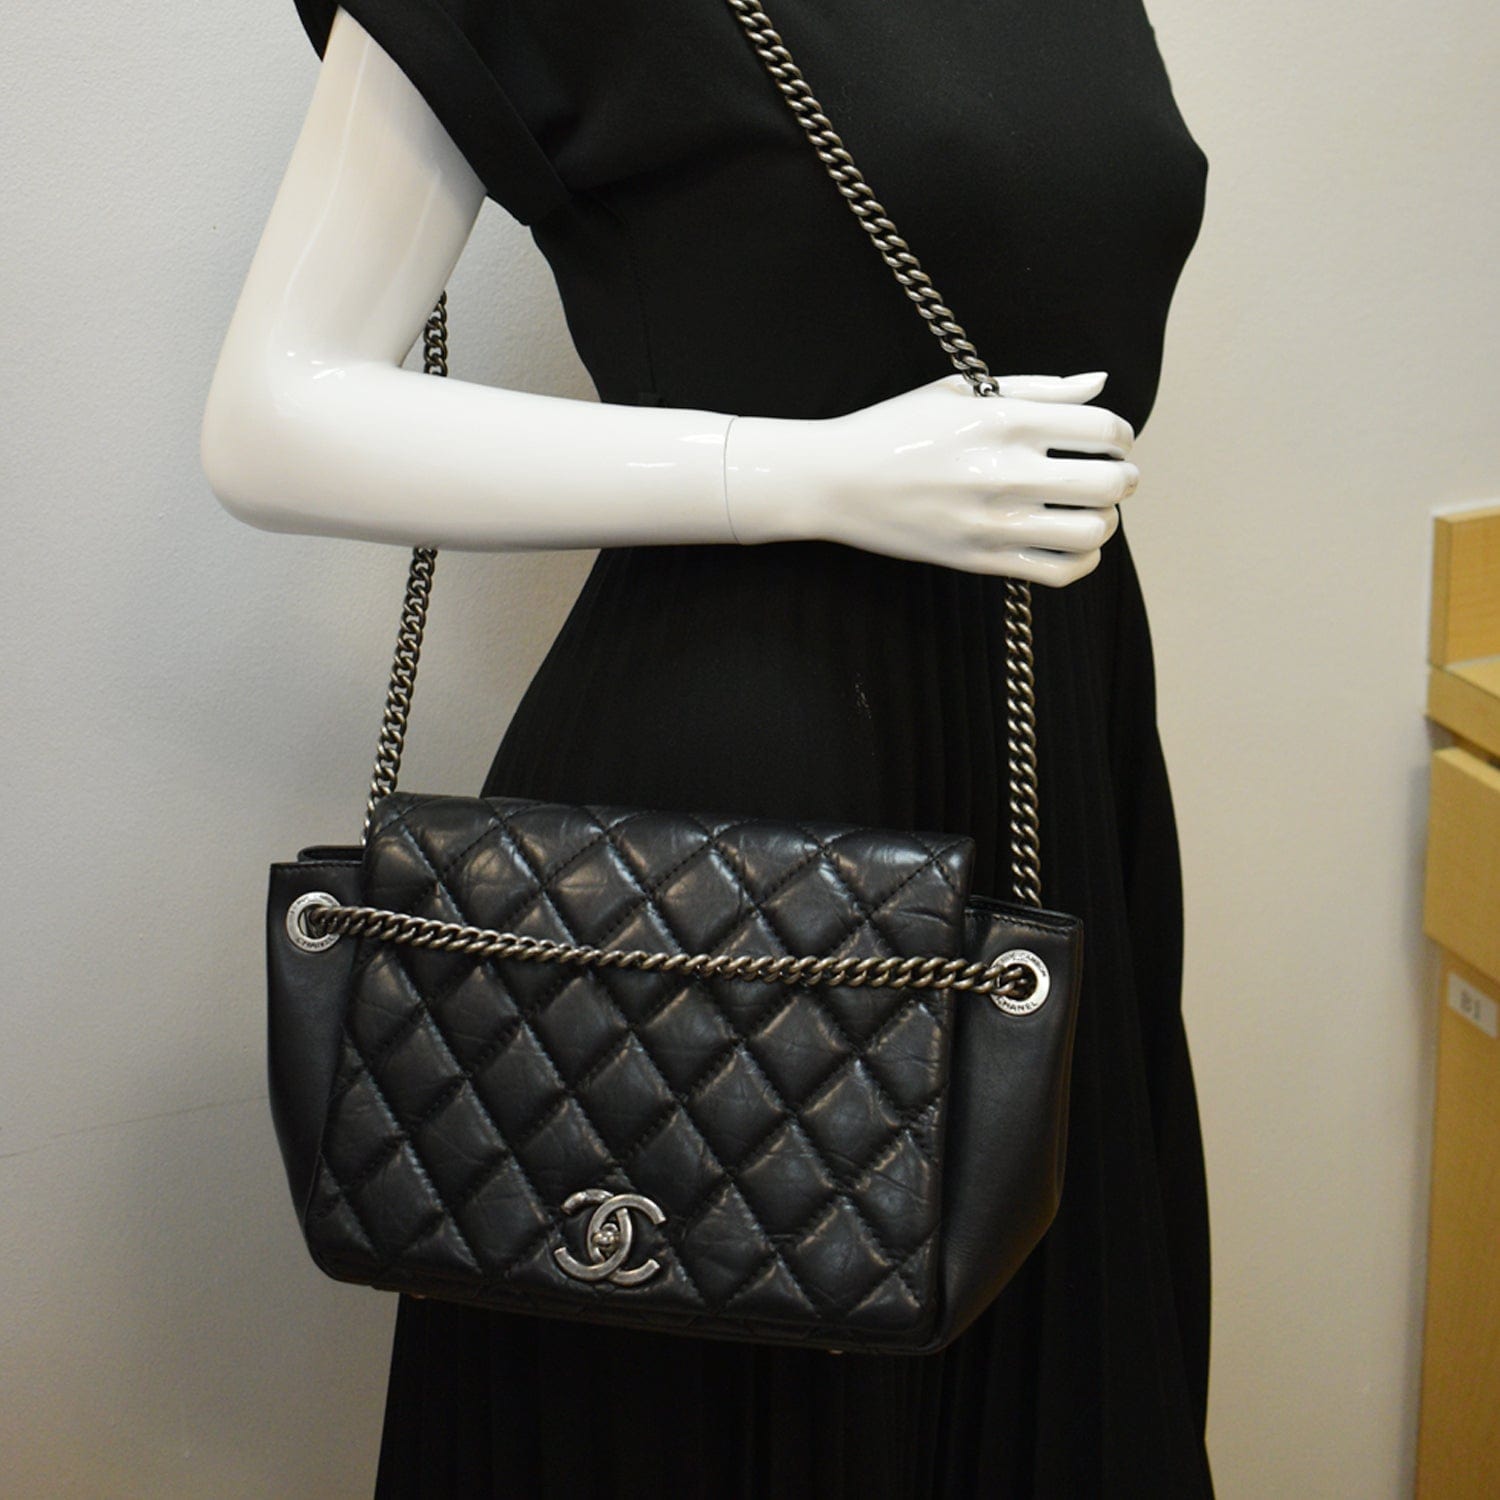 Chanel Black Quilted Lambskin Leather Accordion Flap Bag with